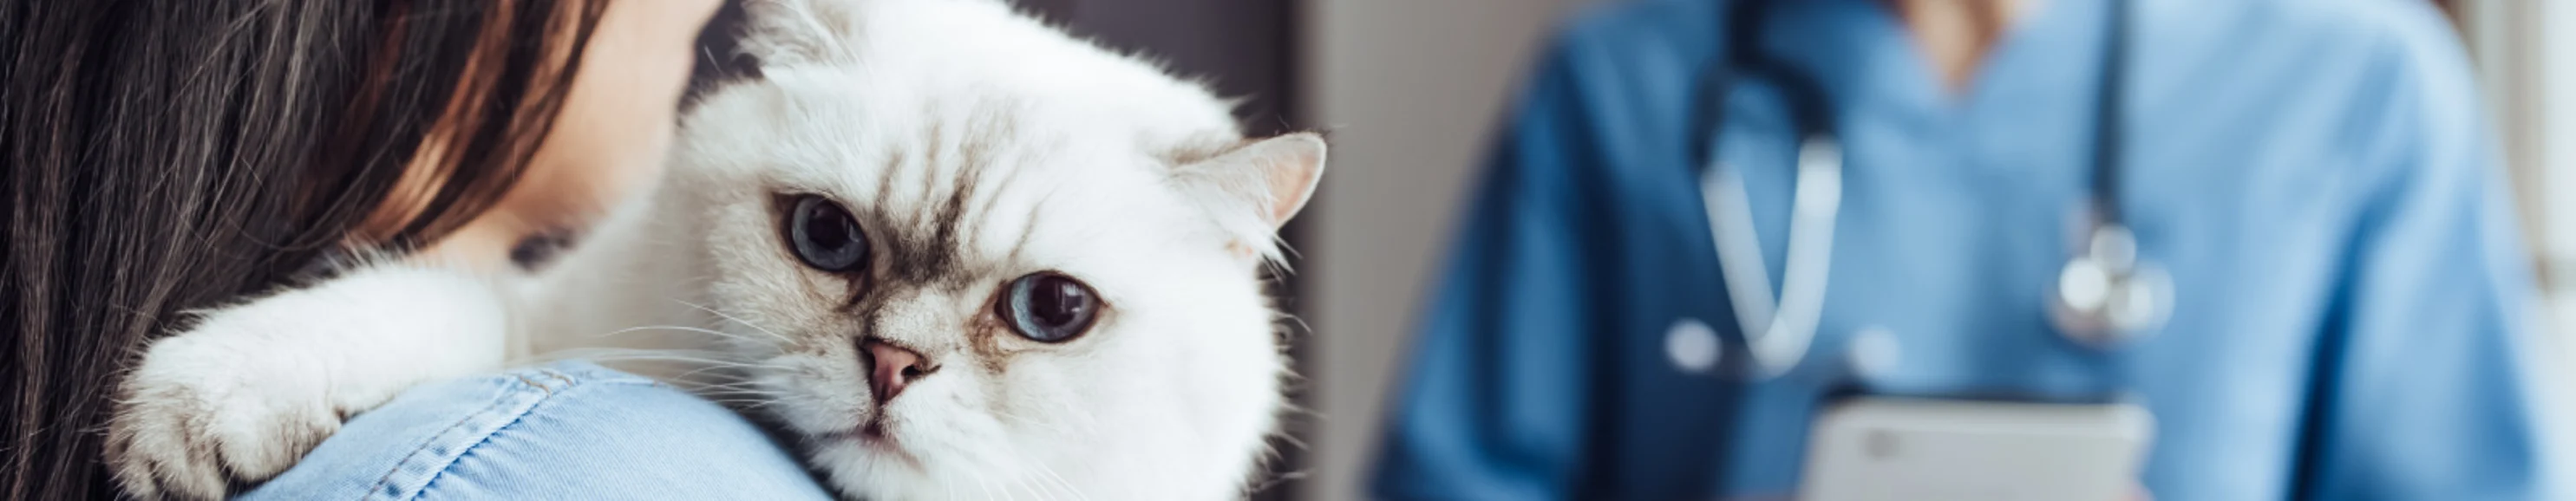 White cat being held by owner who is talking with a veterinarian